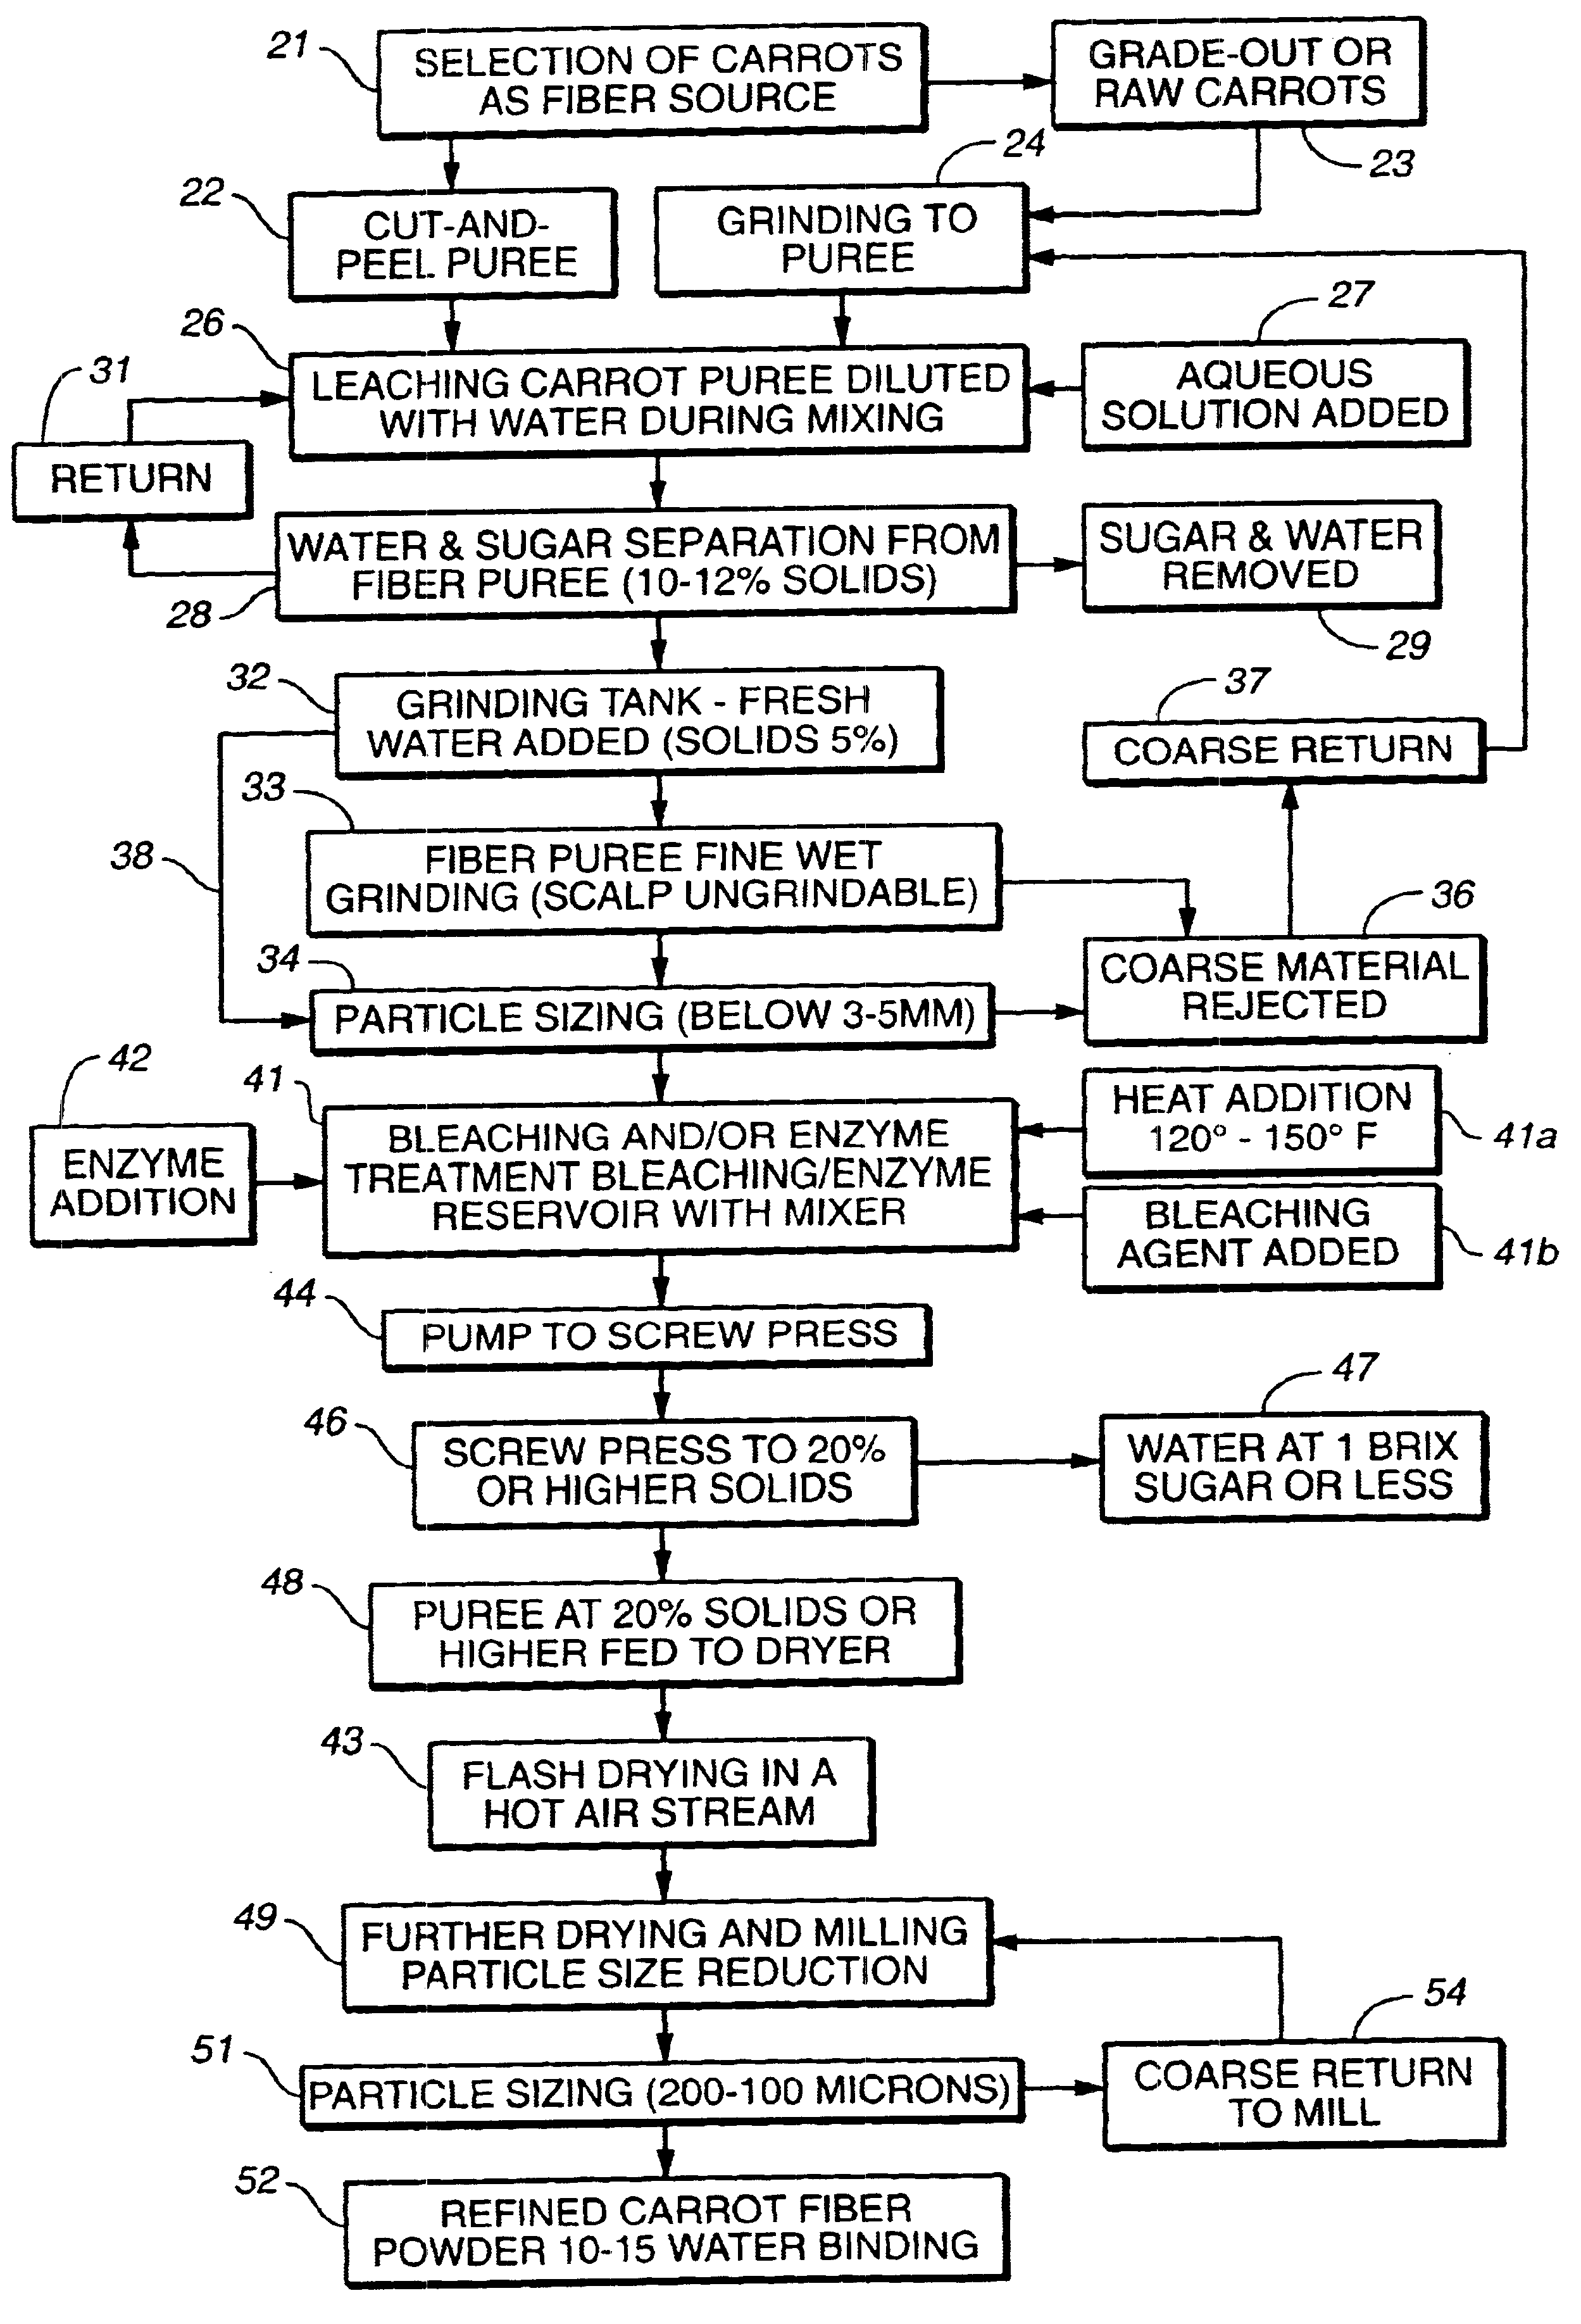 Process and apparatus for producing fiber product with high water-binding capacity and food product made therefrom